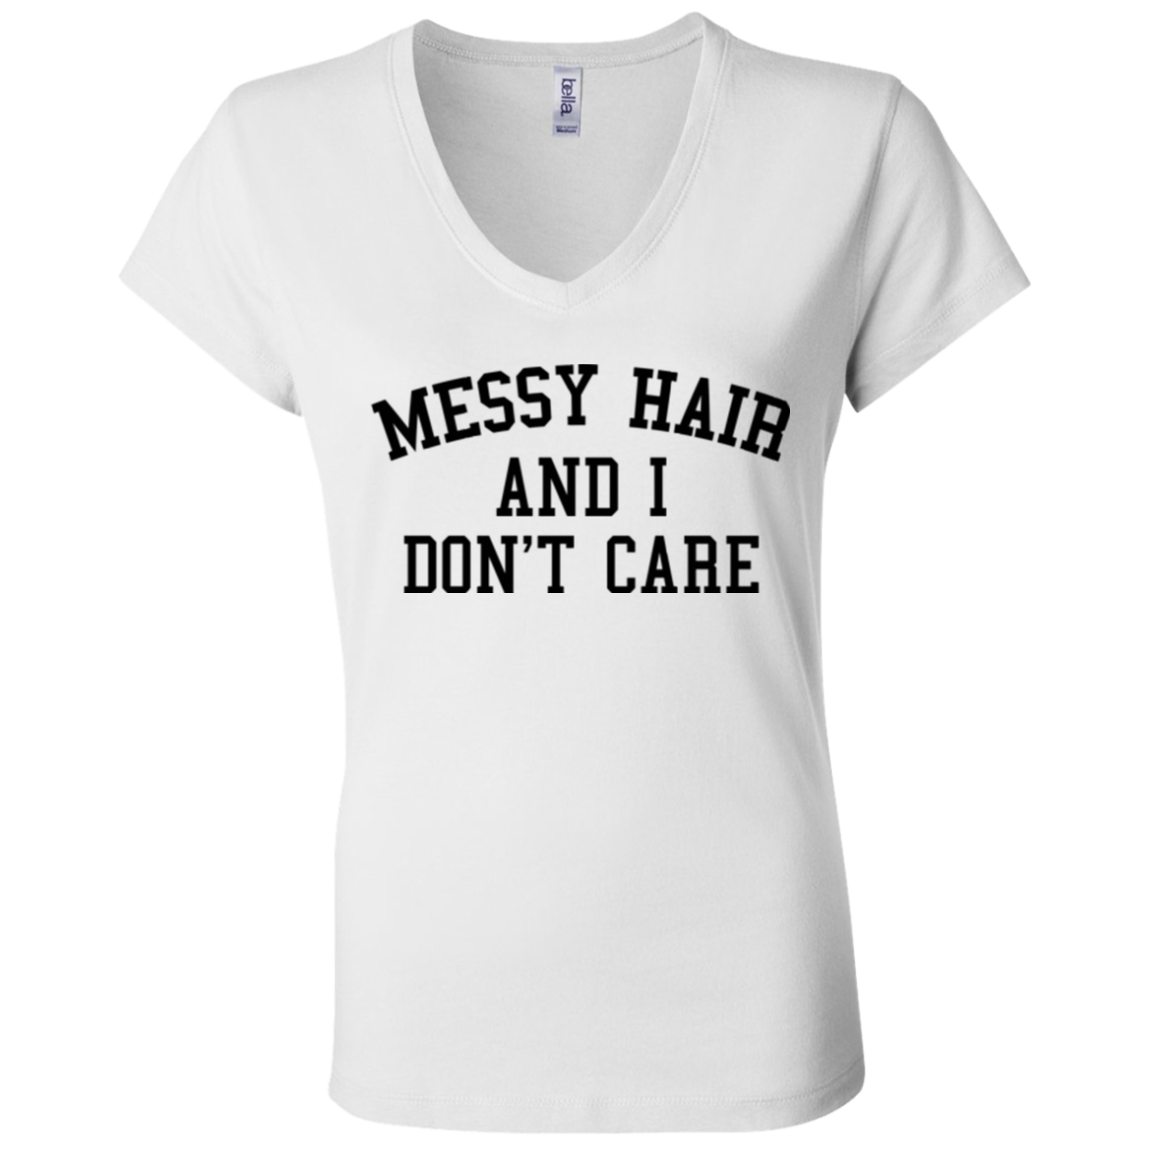 Messy Hair And I Don't Care / Bella + Canvas Ladies' Jersey V-Neck T-Shirtessy Hair And I Don't